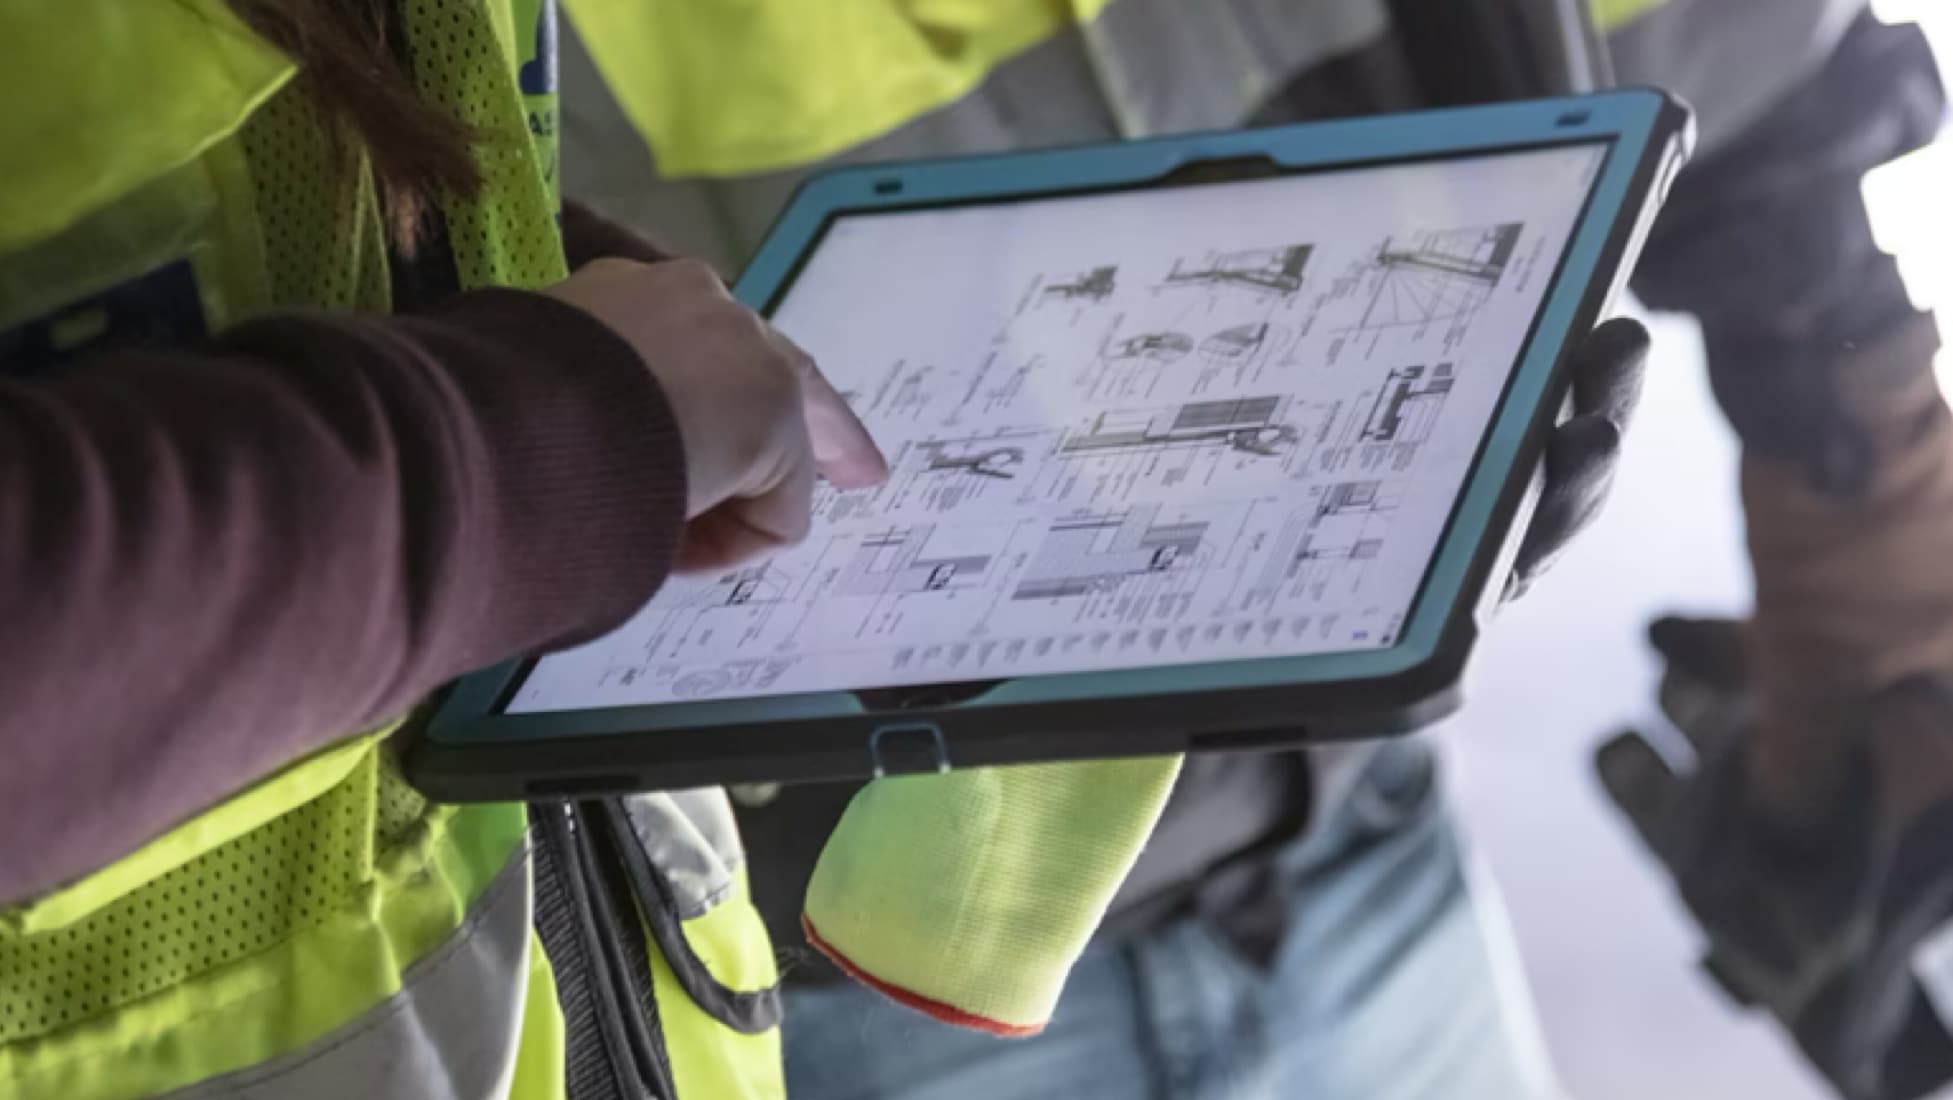 Close-up view of construction worker wearing high-viz yellow vest pointing at schematics on iPad screen. A fellow construction worker stands to main subject's left, also wearing high-viz yellow vest and work gloves.